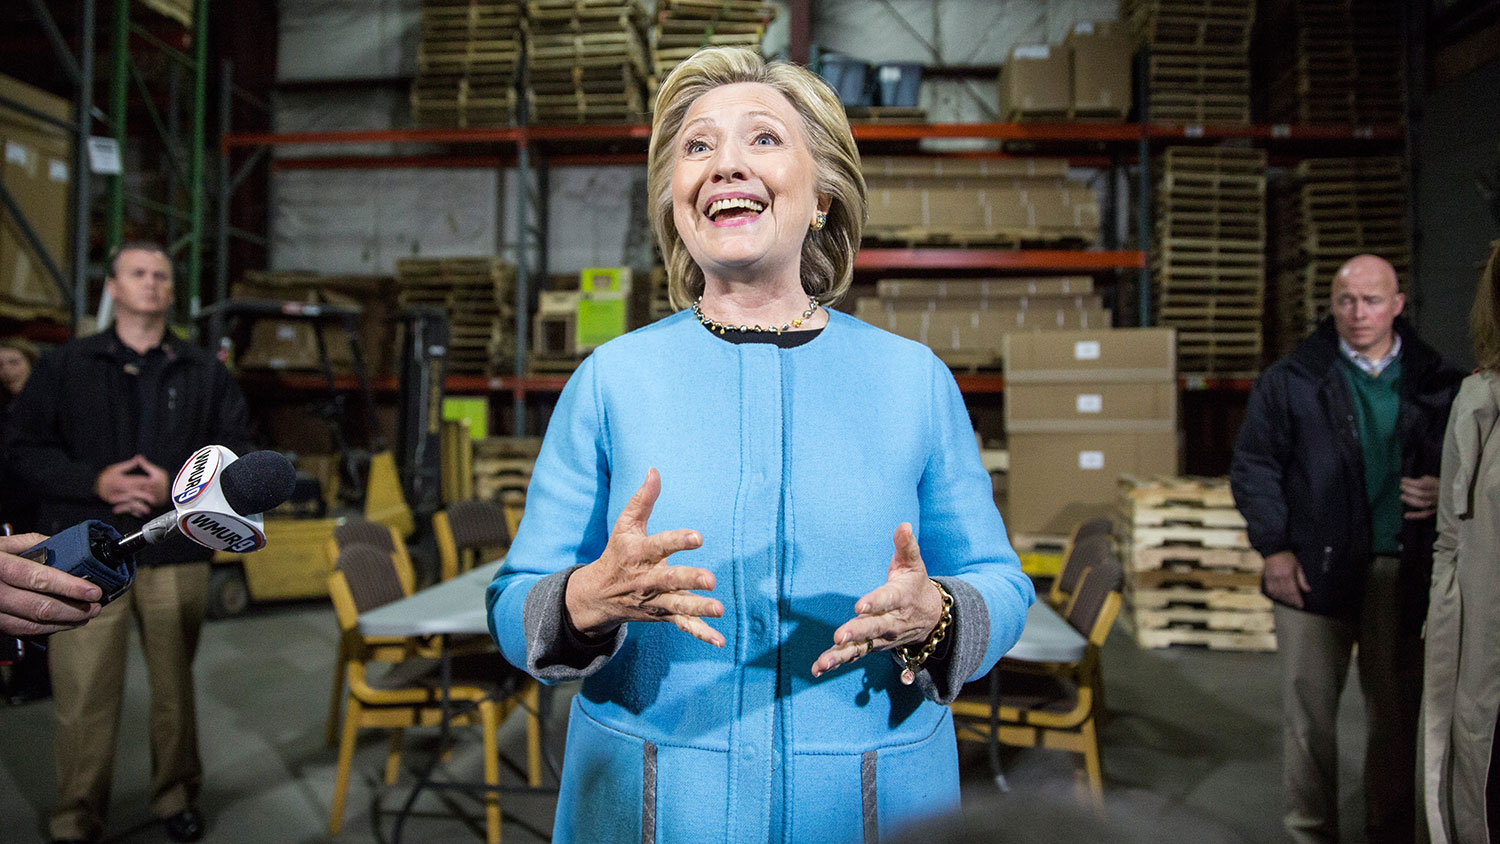 Democratic presidential hopeful and former U.S. Sectetary of State Hillary Clinton speaks with members of the media after a round trable discussion with employees of Whitney Brothers, an educational furniture manufacturer, April 20, 2015 in Keene, New Hampshire.
